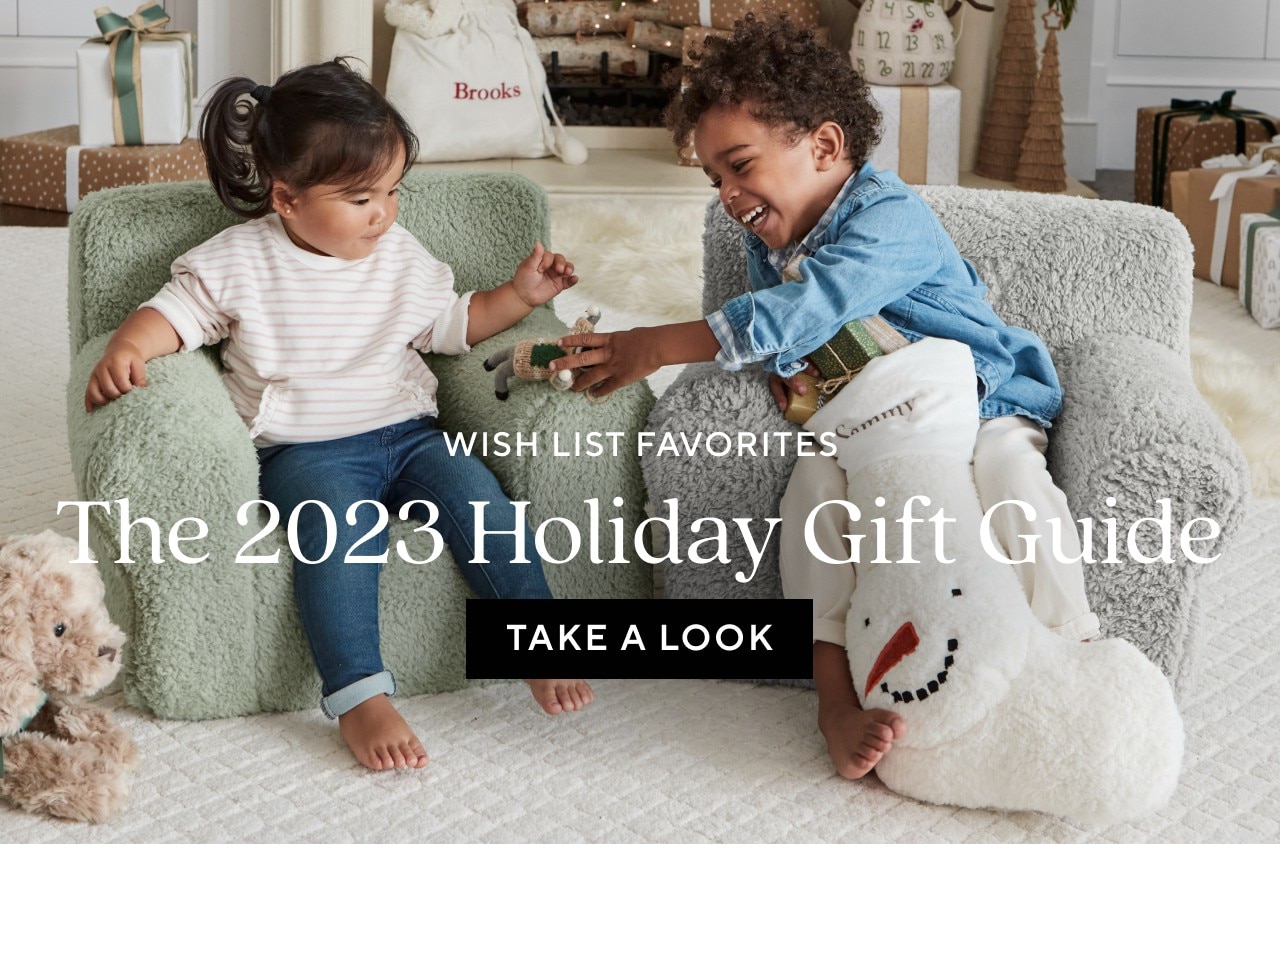 WISH LIST FAVORITES - THE 2023 HOLIDAY GIFT GUIDE